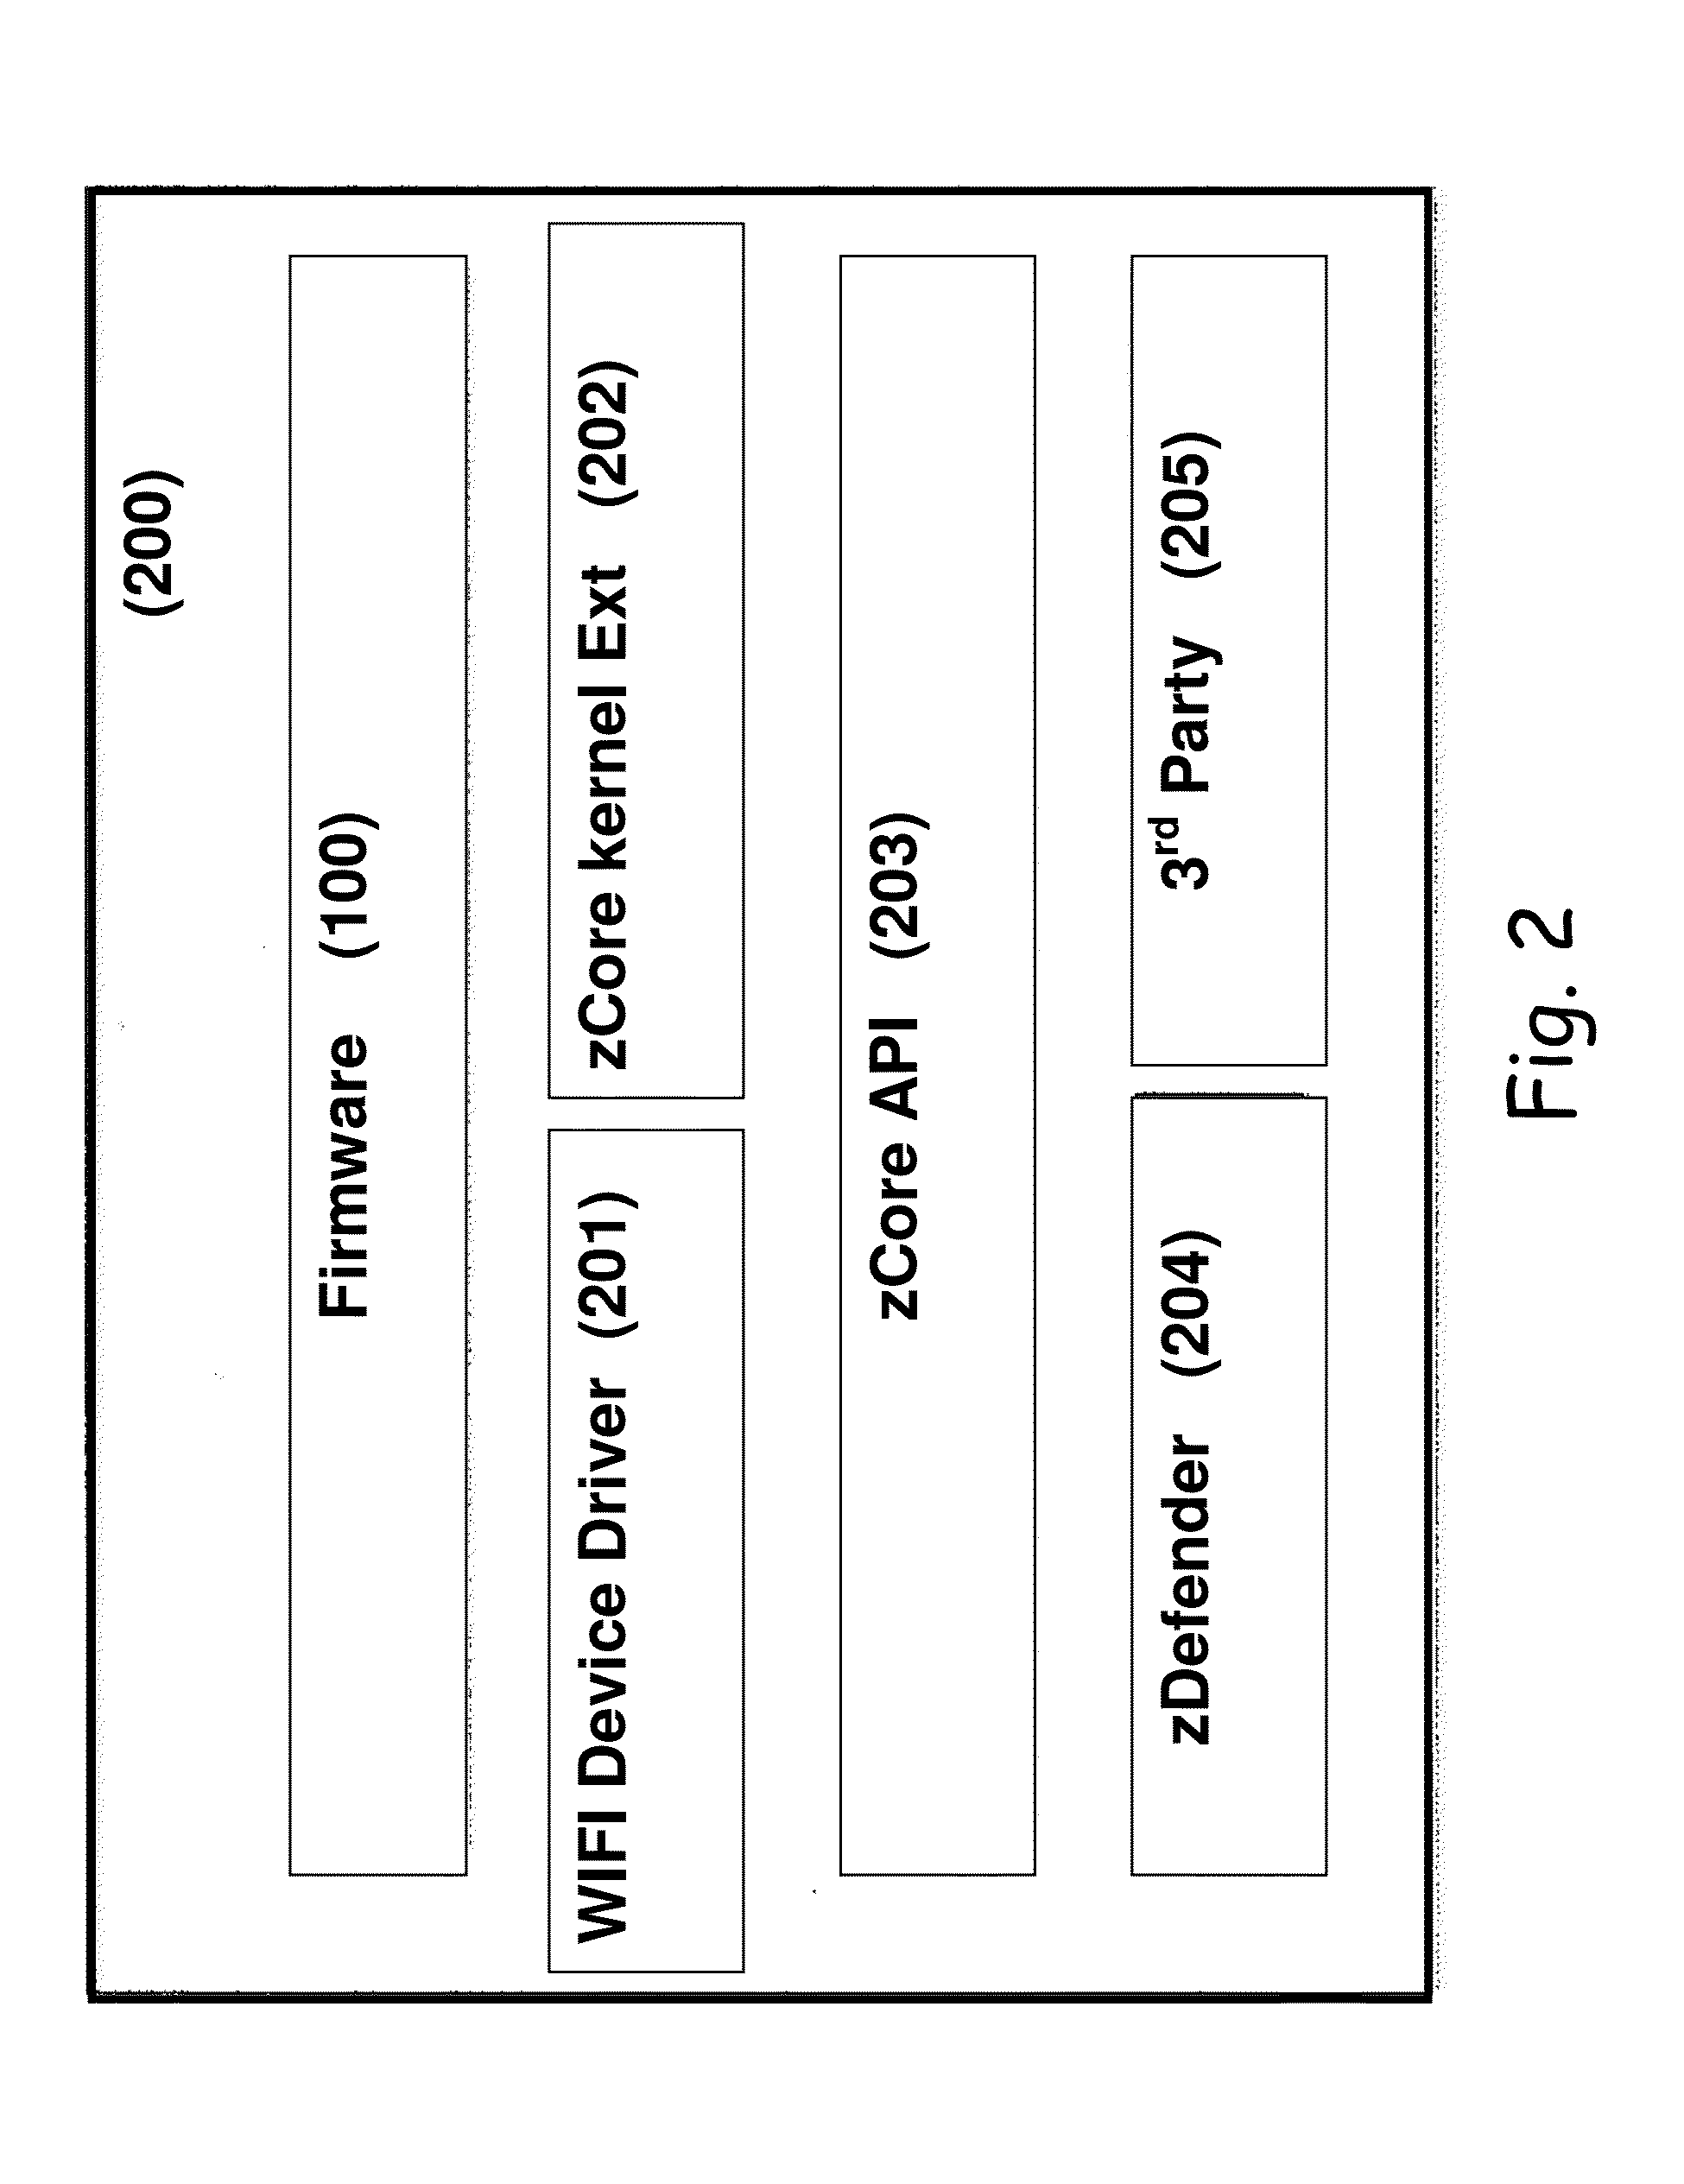 Preventive intrusion device and method for mobile devices